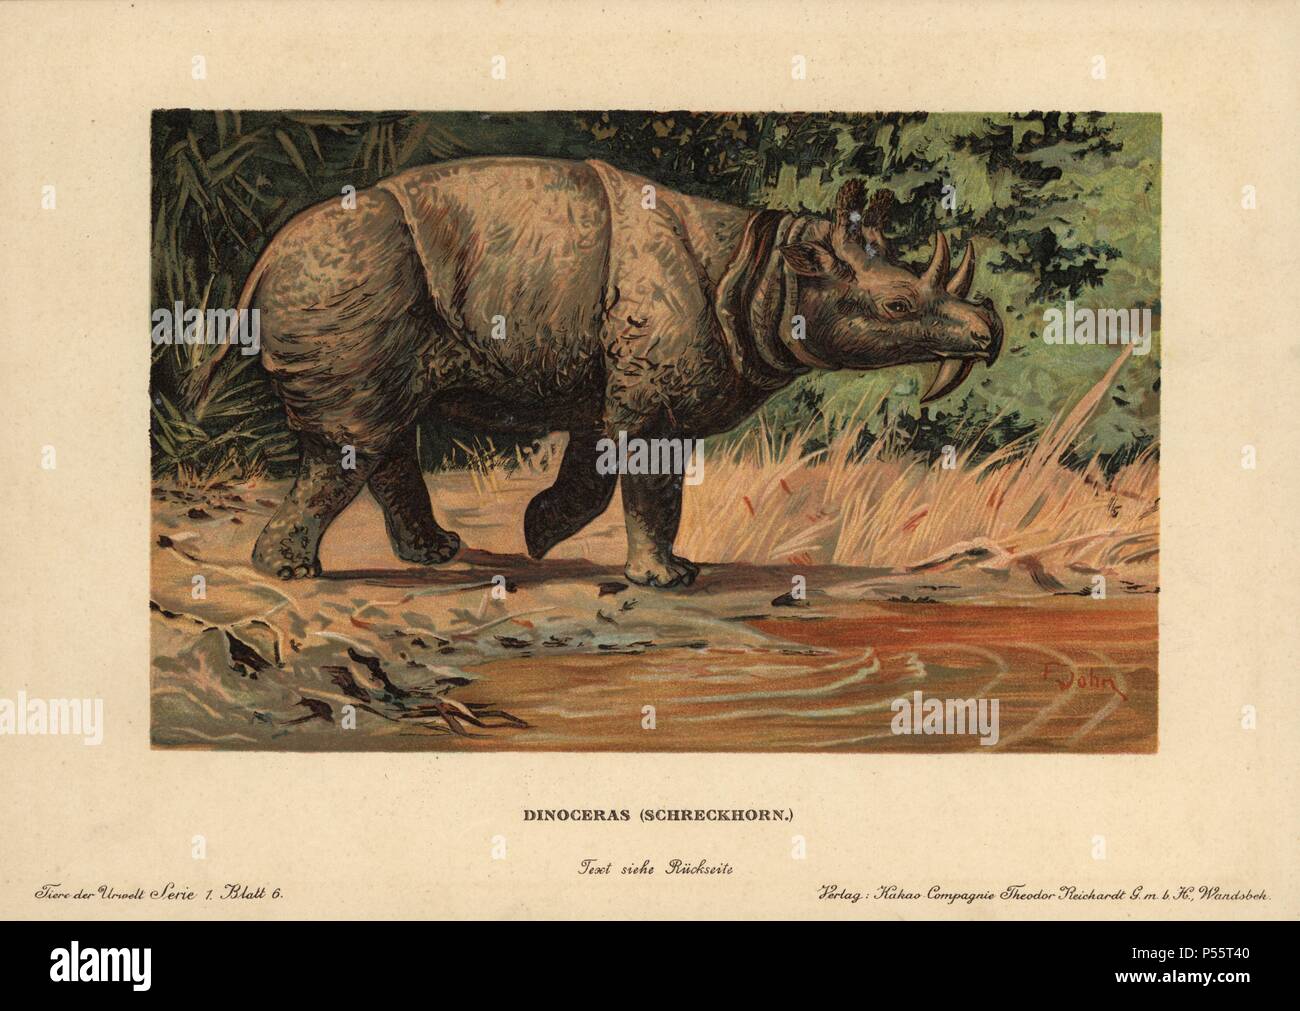 Dinoceras, Uintatherium anceps, extinct genus of herbivorous mammal of the Eocene period. Colour printed (chromolithograph) illustration by F. John from 'Tiere der Urwelt' Animals of the Prehistoric World, 1910, Hamburg. From a series of prehistoric creature cards published by the Reichardt Cocoa company. Stock Photo